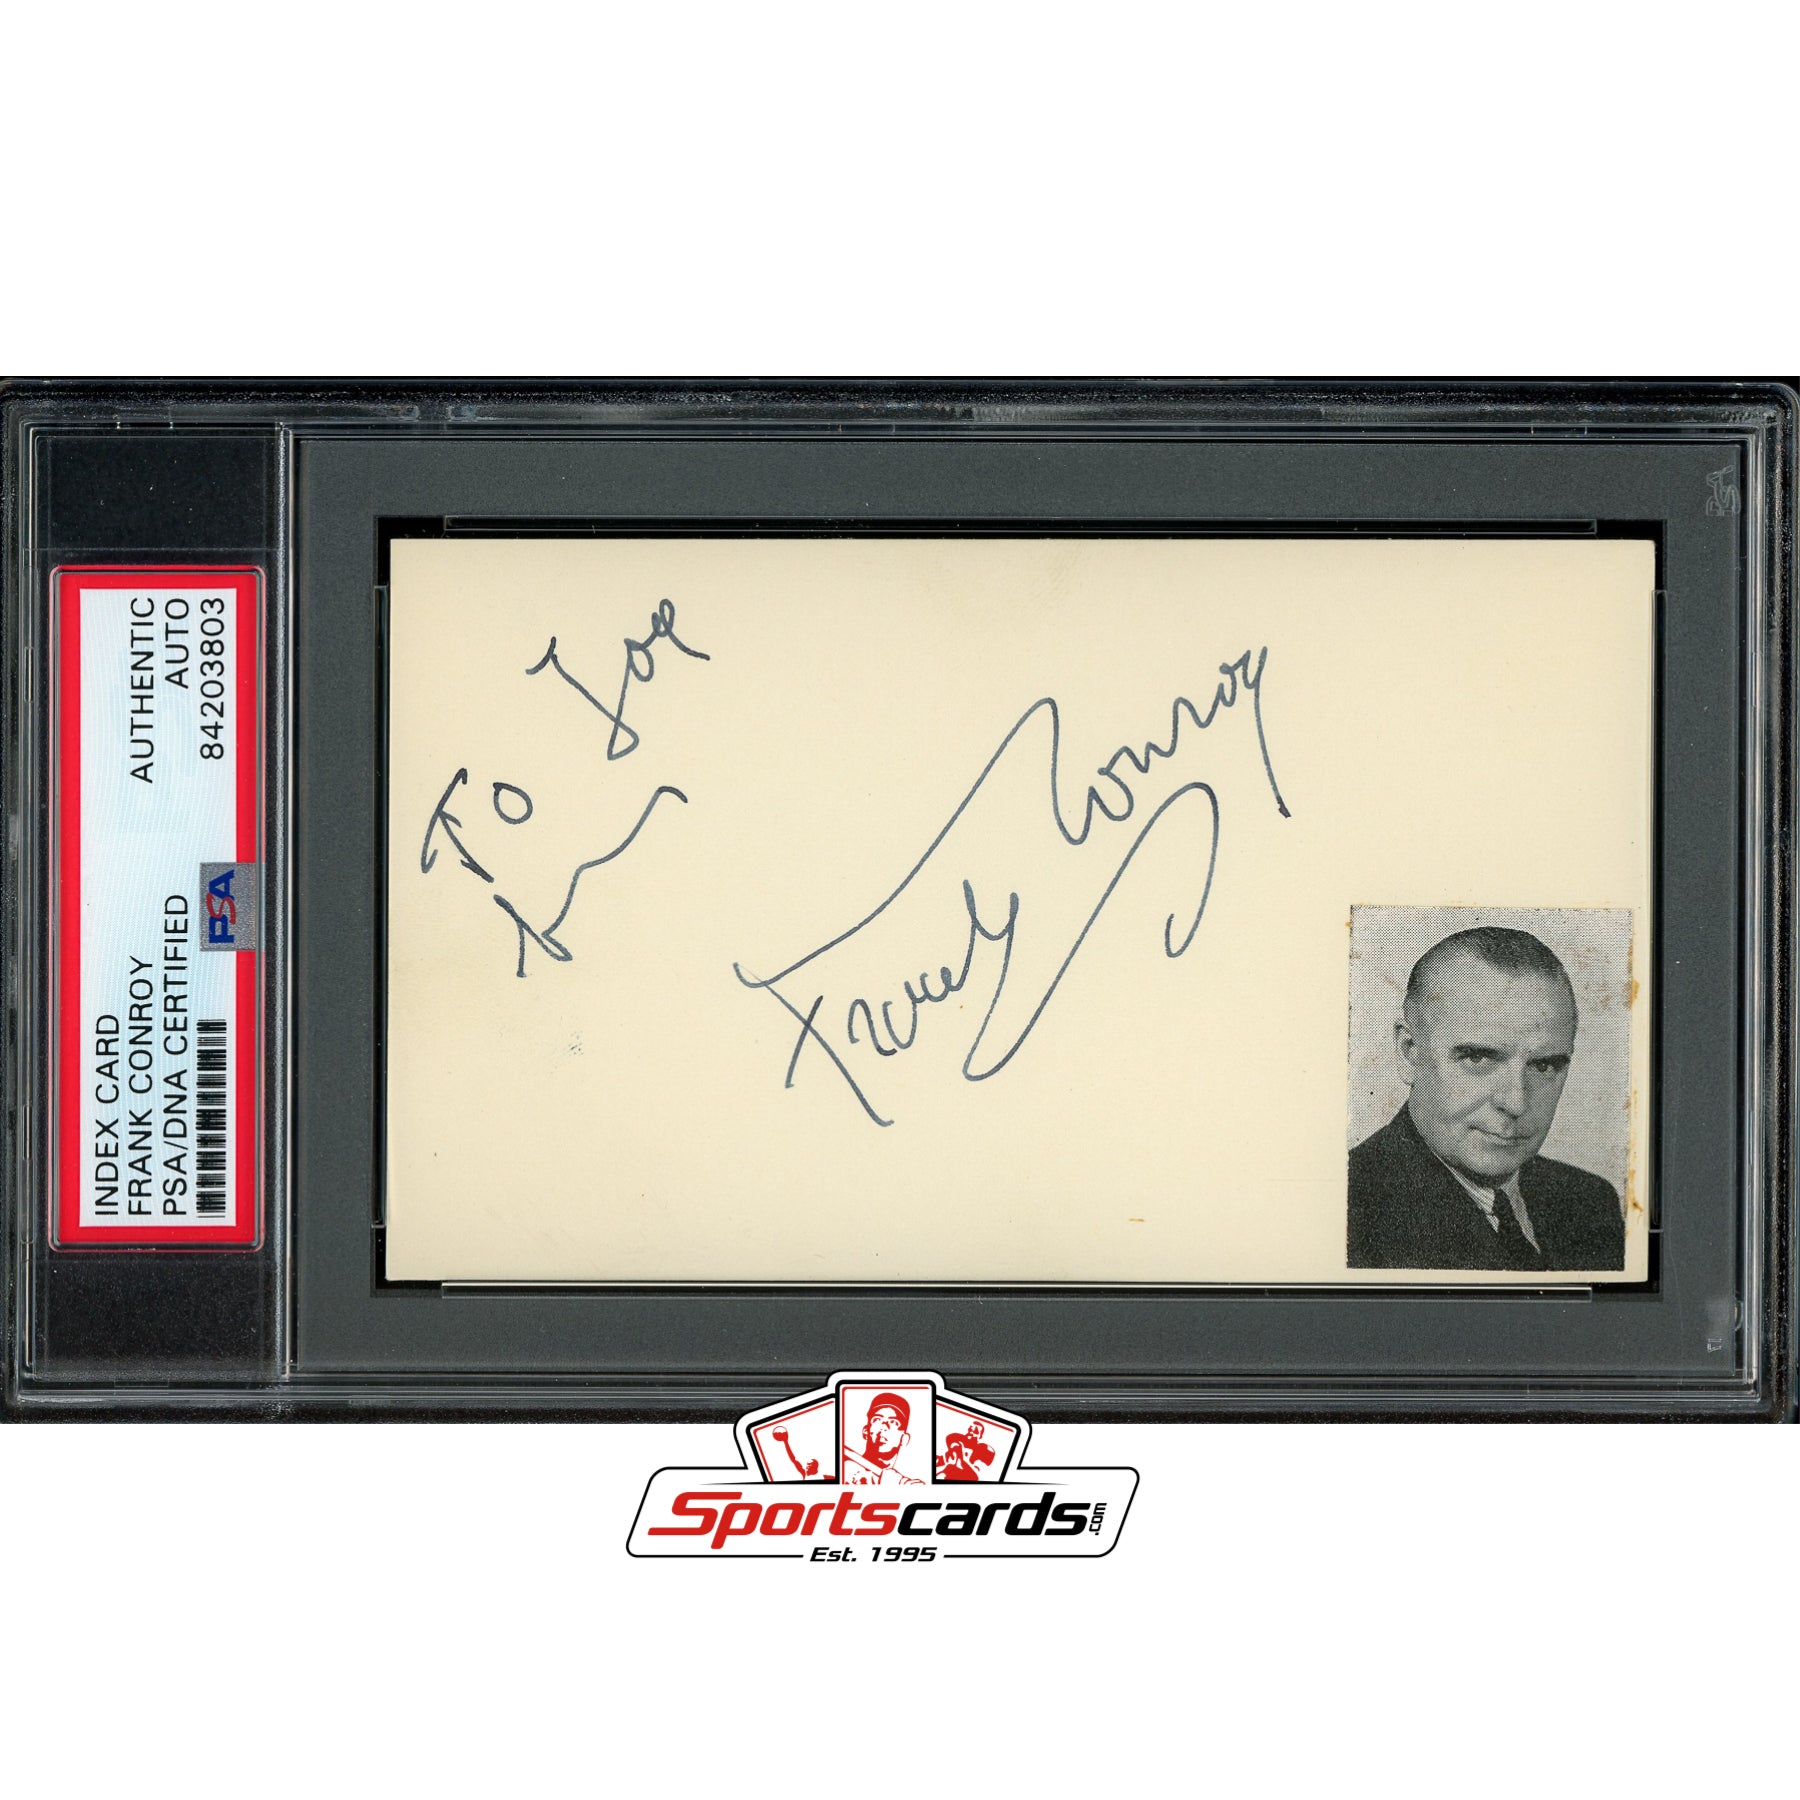 Frank Conroy (d.1964) Signed Auto 3x5 Index Card PSA/DNA Actor Grand Hotel